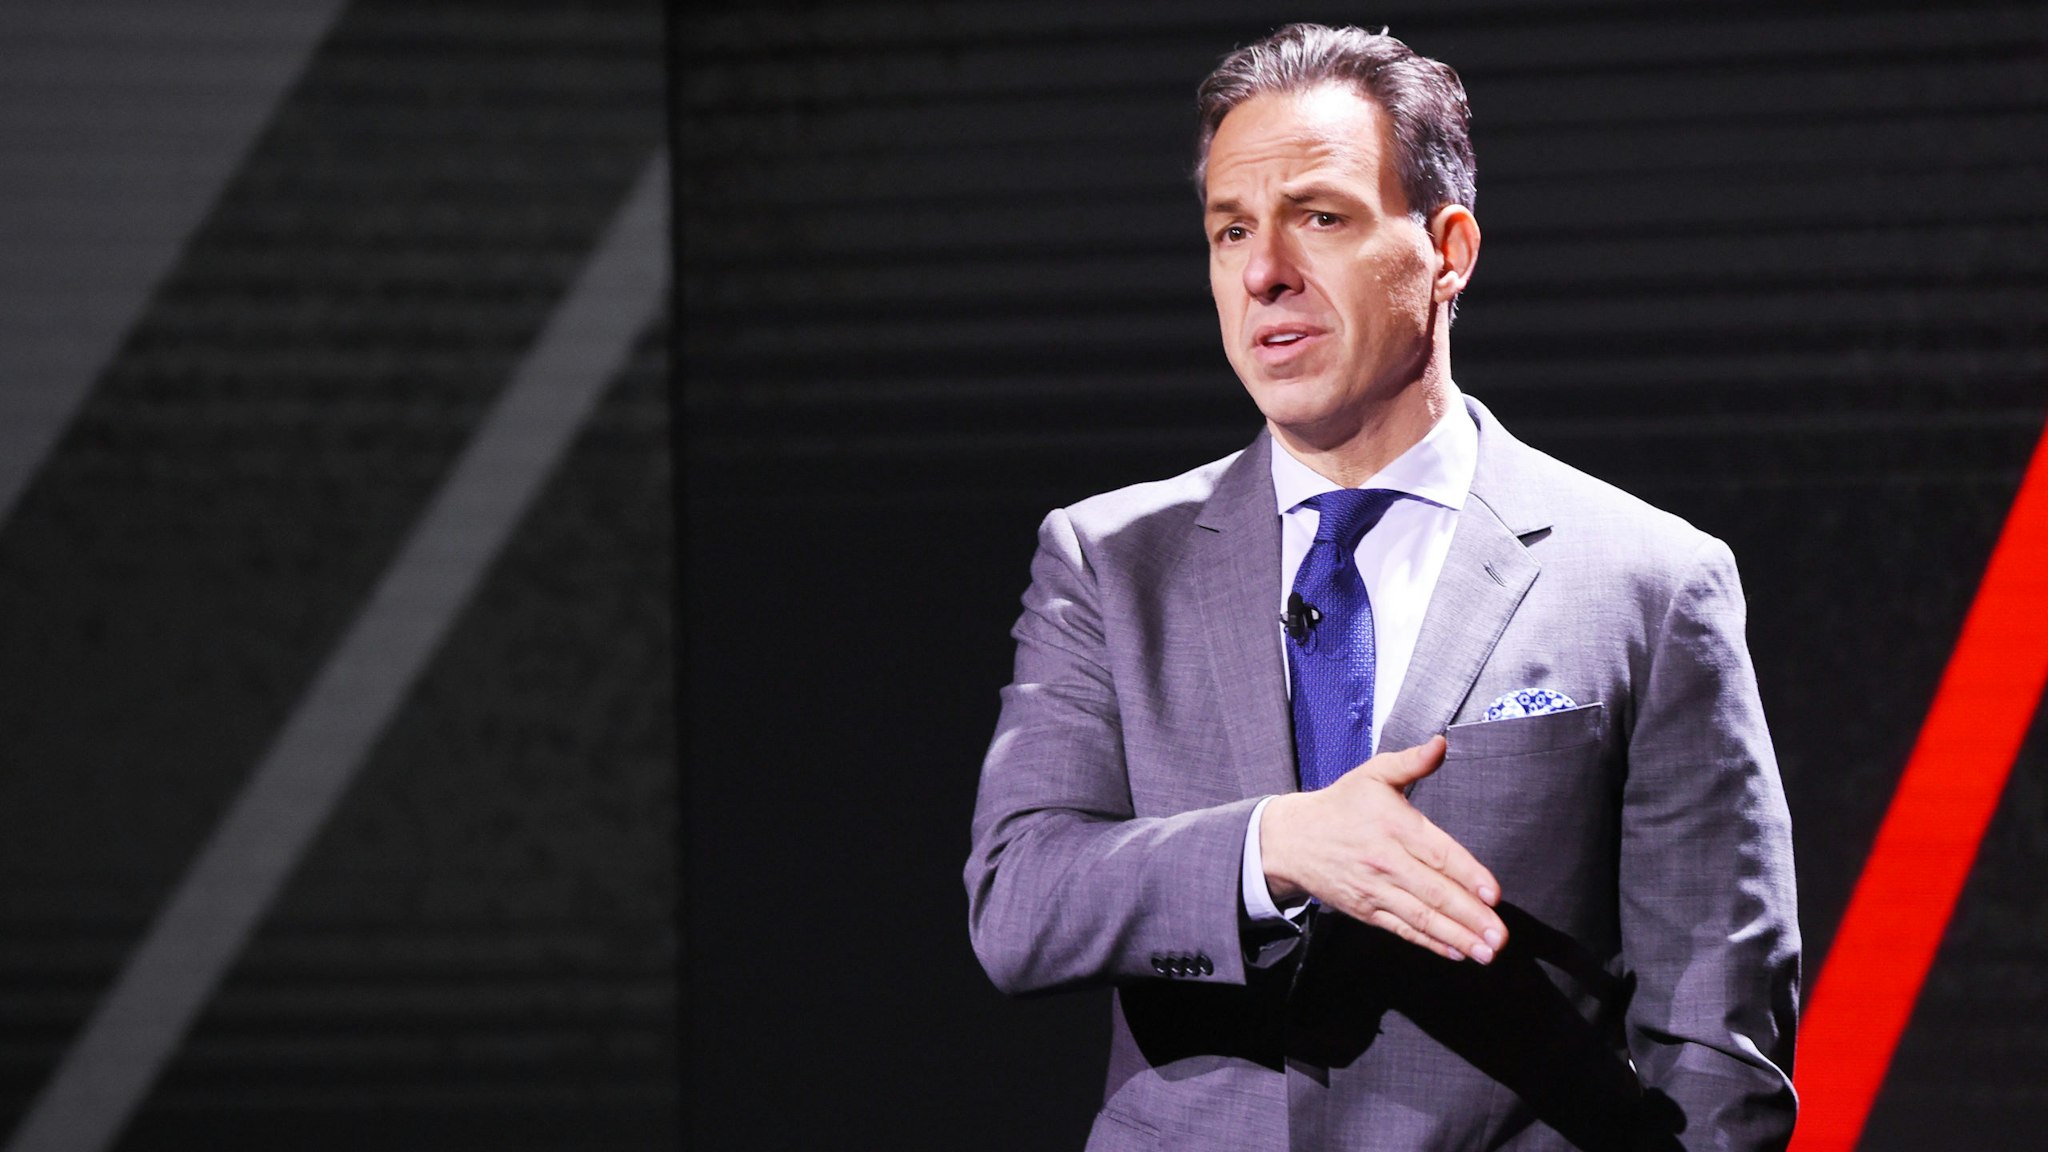 NEW YORK, NEW YORK - MAY 15: Jake Tapper of CNN’s The Lead with Jake Tapper and CNN’s State of the Union with Jake Tapper speaks onstage during the WarnerMedia Upfront 2019 show at The Theater at Madison Square Garden on May 15, 2019 in New York City. 602140